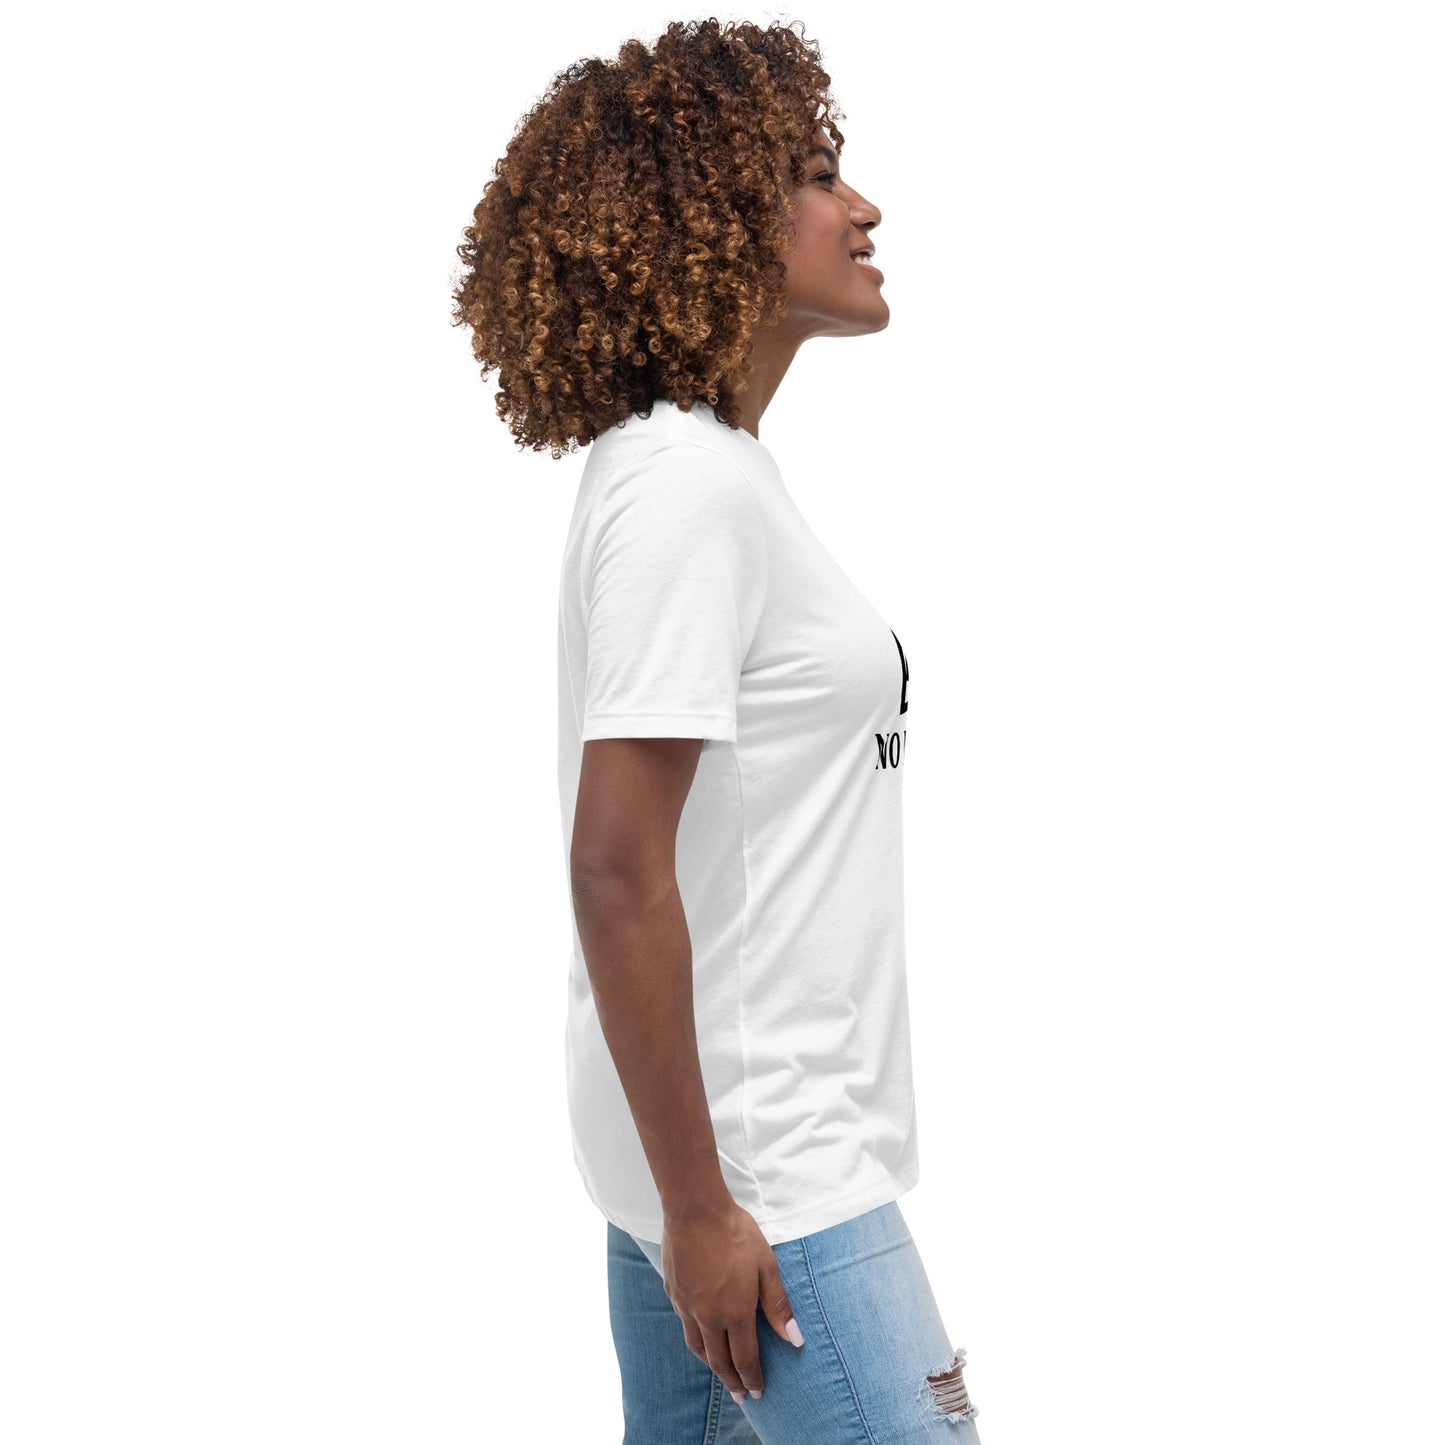 Women with white t-shirt with image and text "no image available"